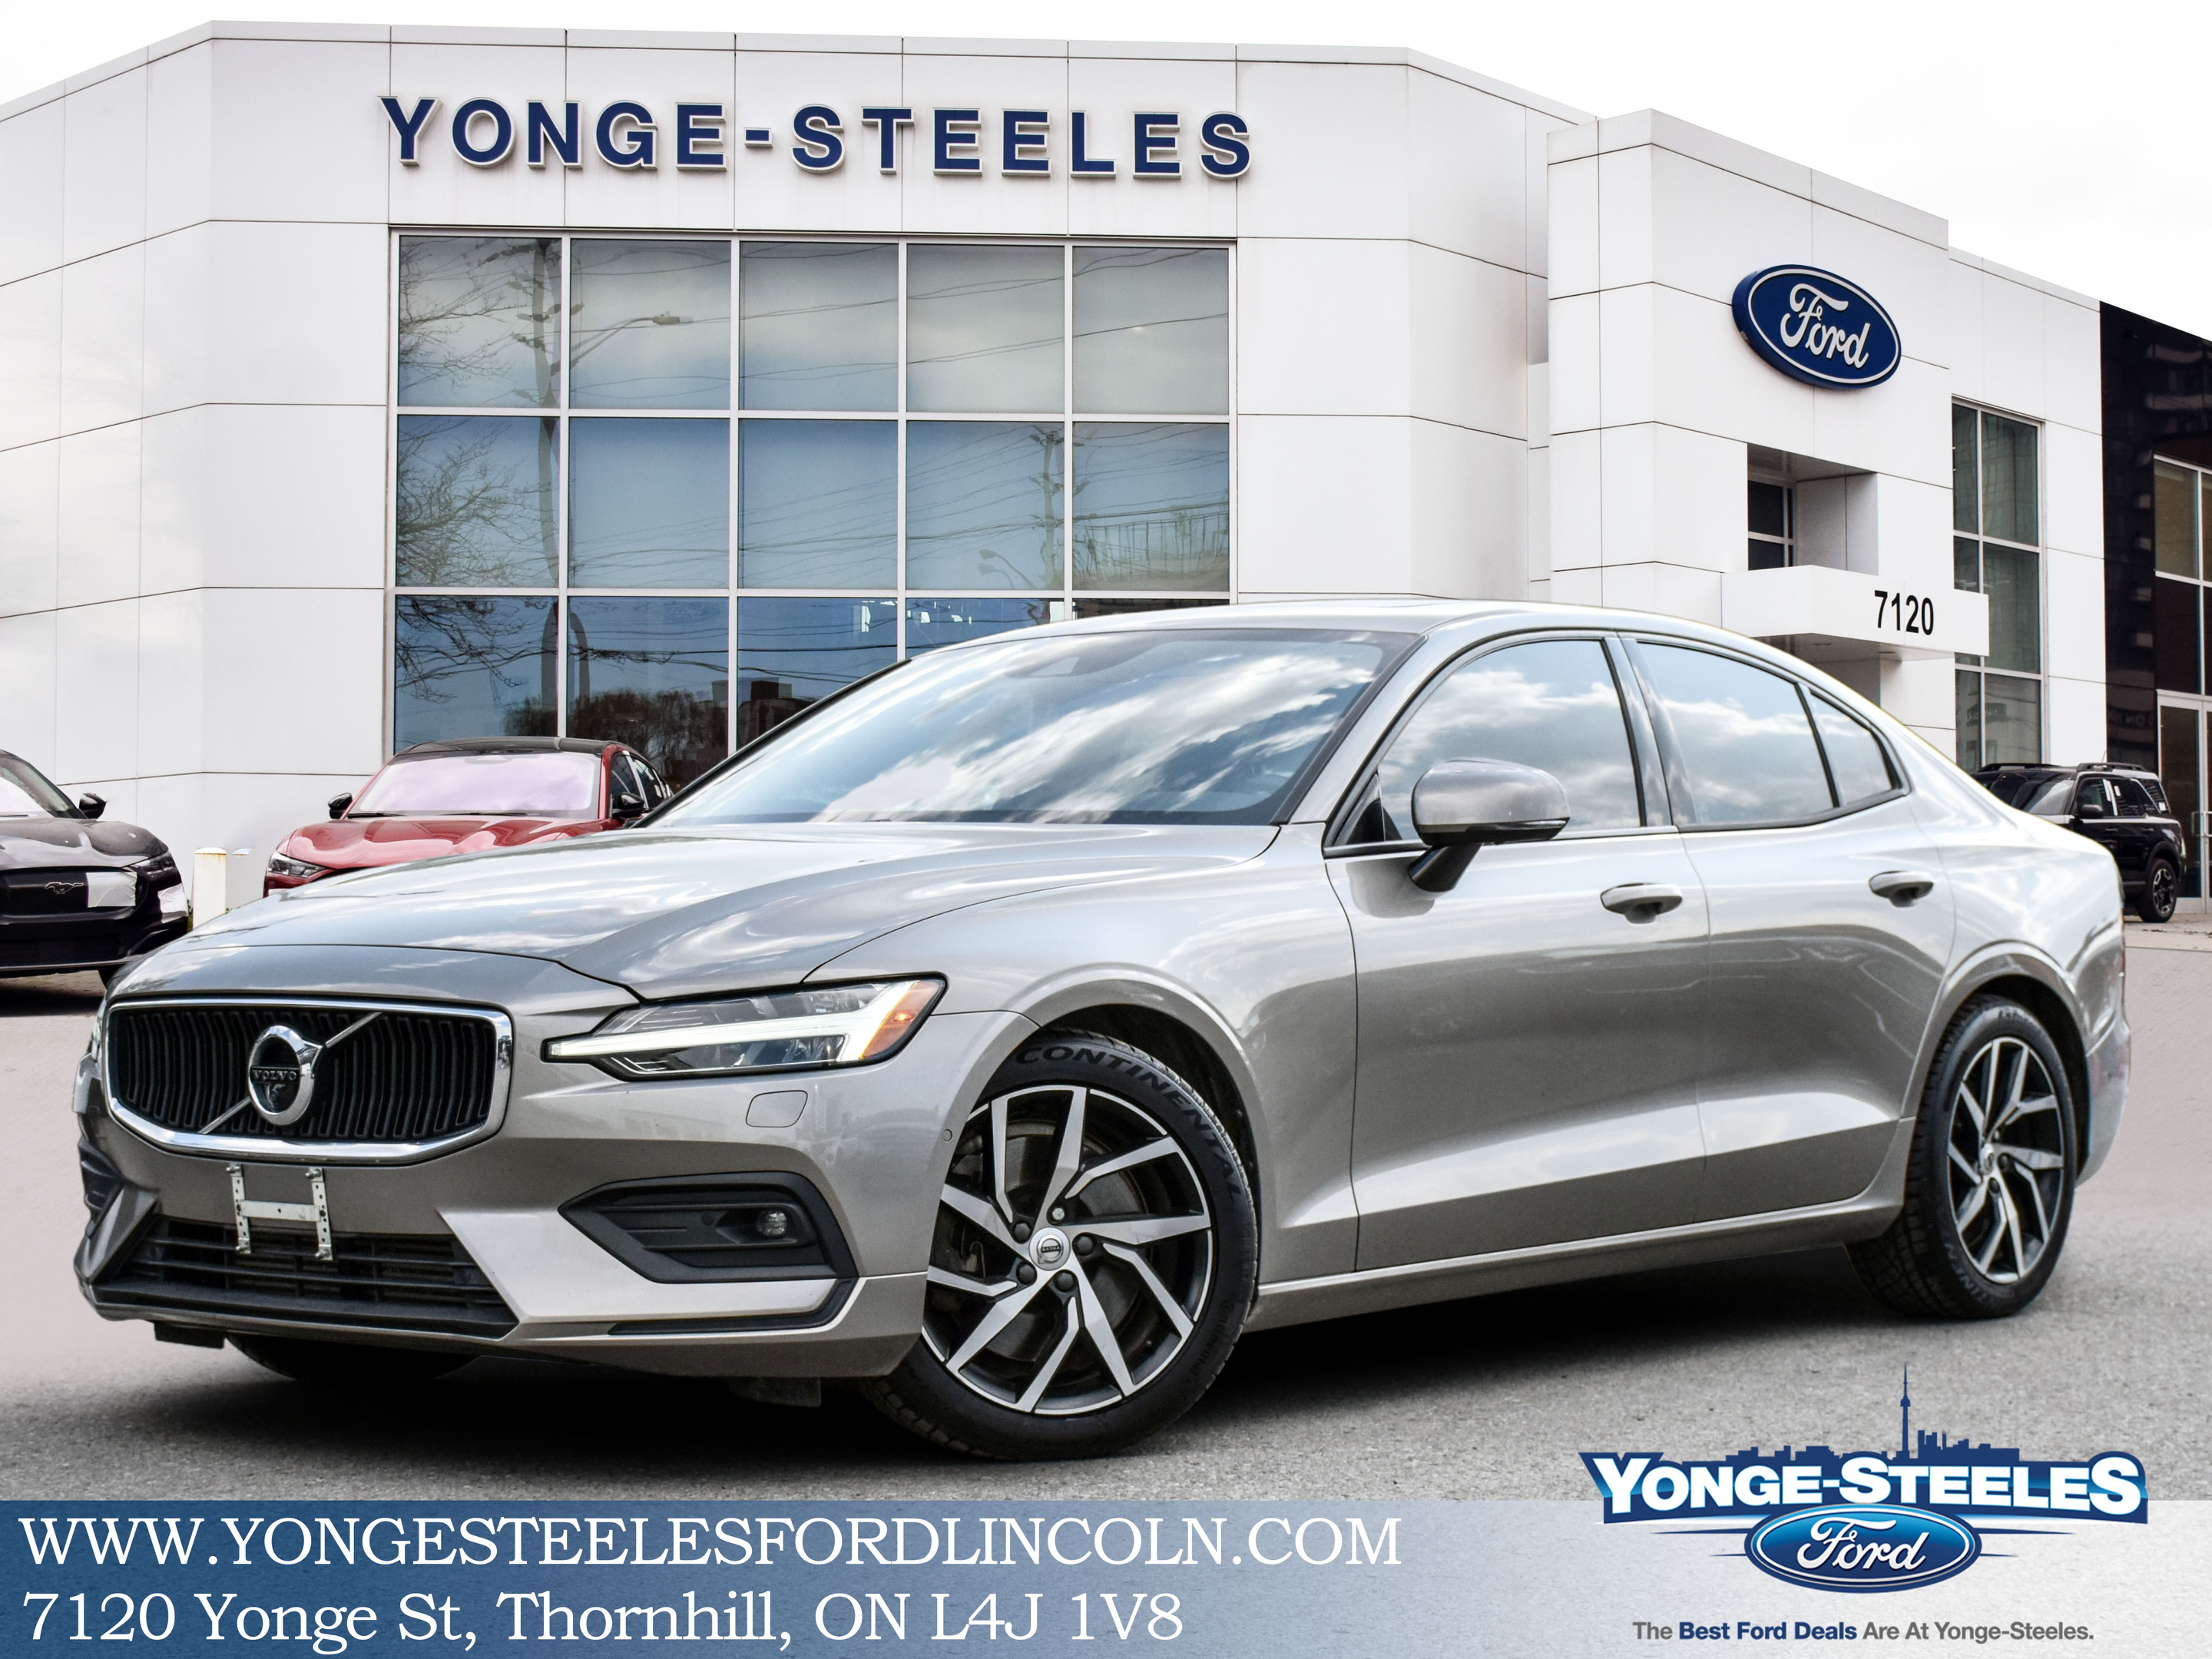 2019 Volvo S60 T6 MOMENTUM 3.0L LEATHER ROOF CLIMATE PKG